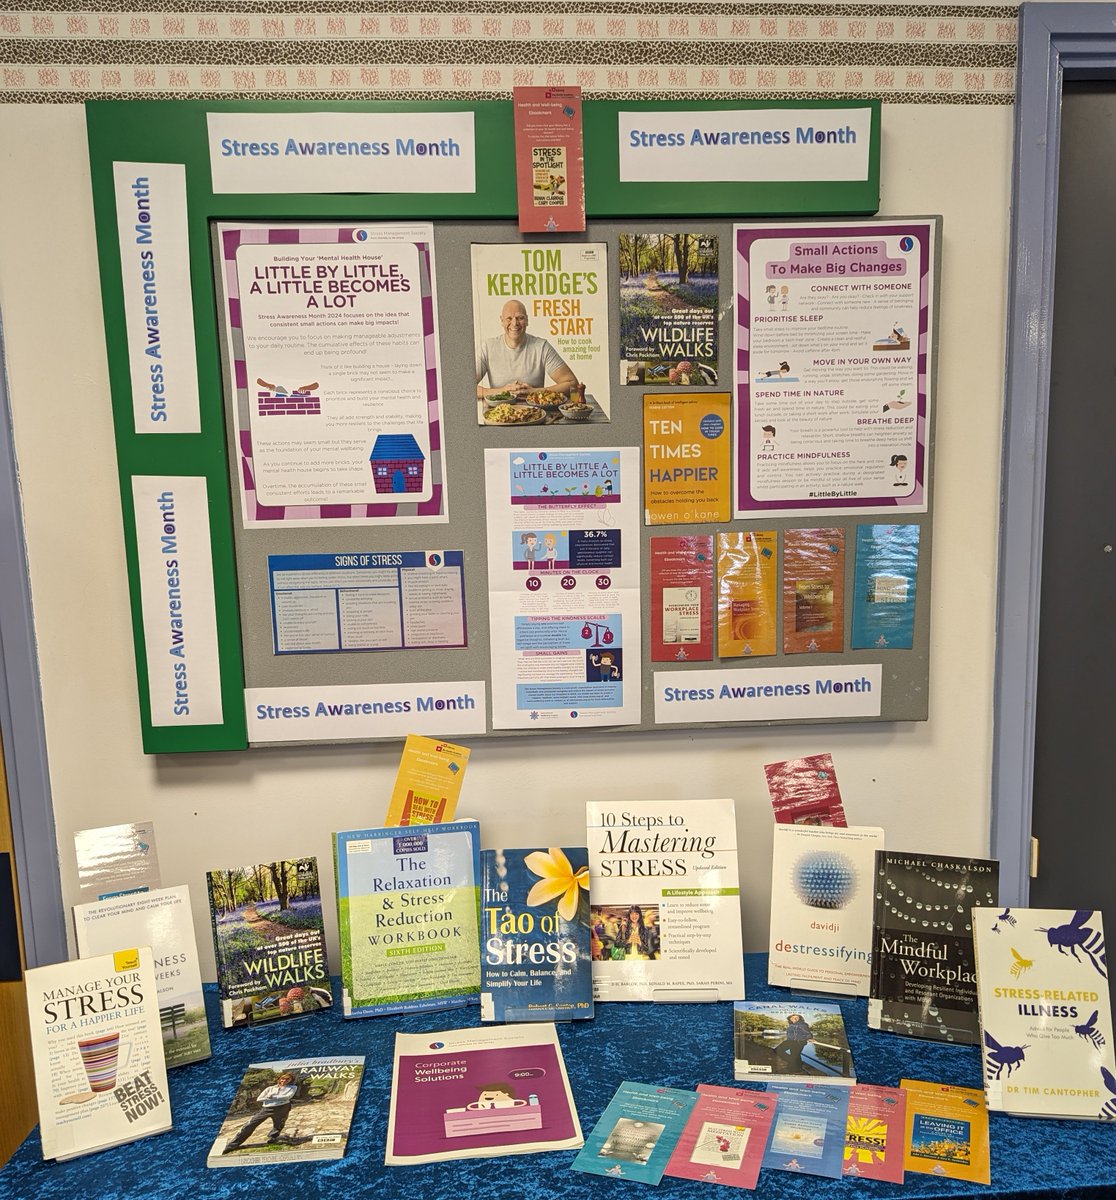 April is #StressAwarenessMonth To support staff and students @LancsHospitals who may be struggling with stress we have book displays at both libraries full of practical advice on managing stress, anxiety and burnout. Browse more books online 👉 bit.ly/4cNqC10 📚